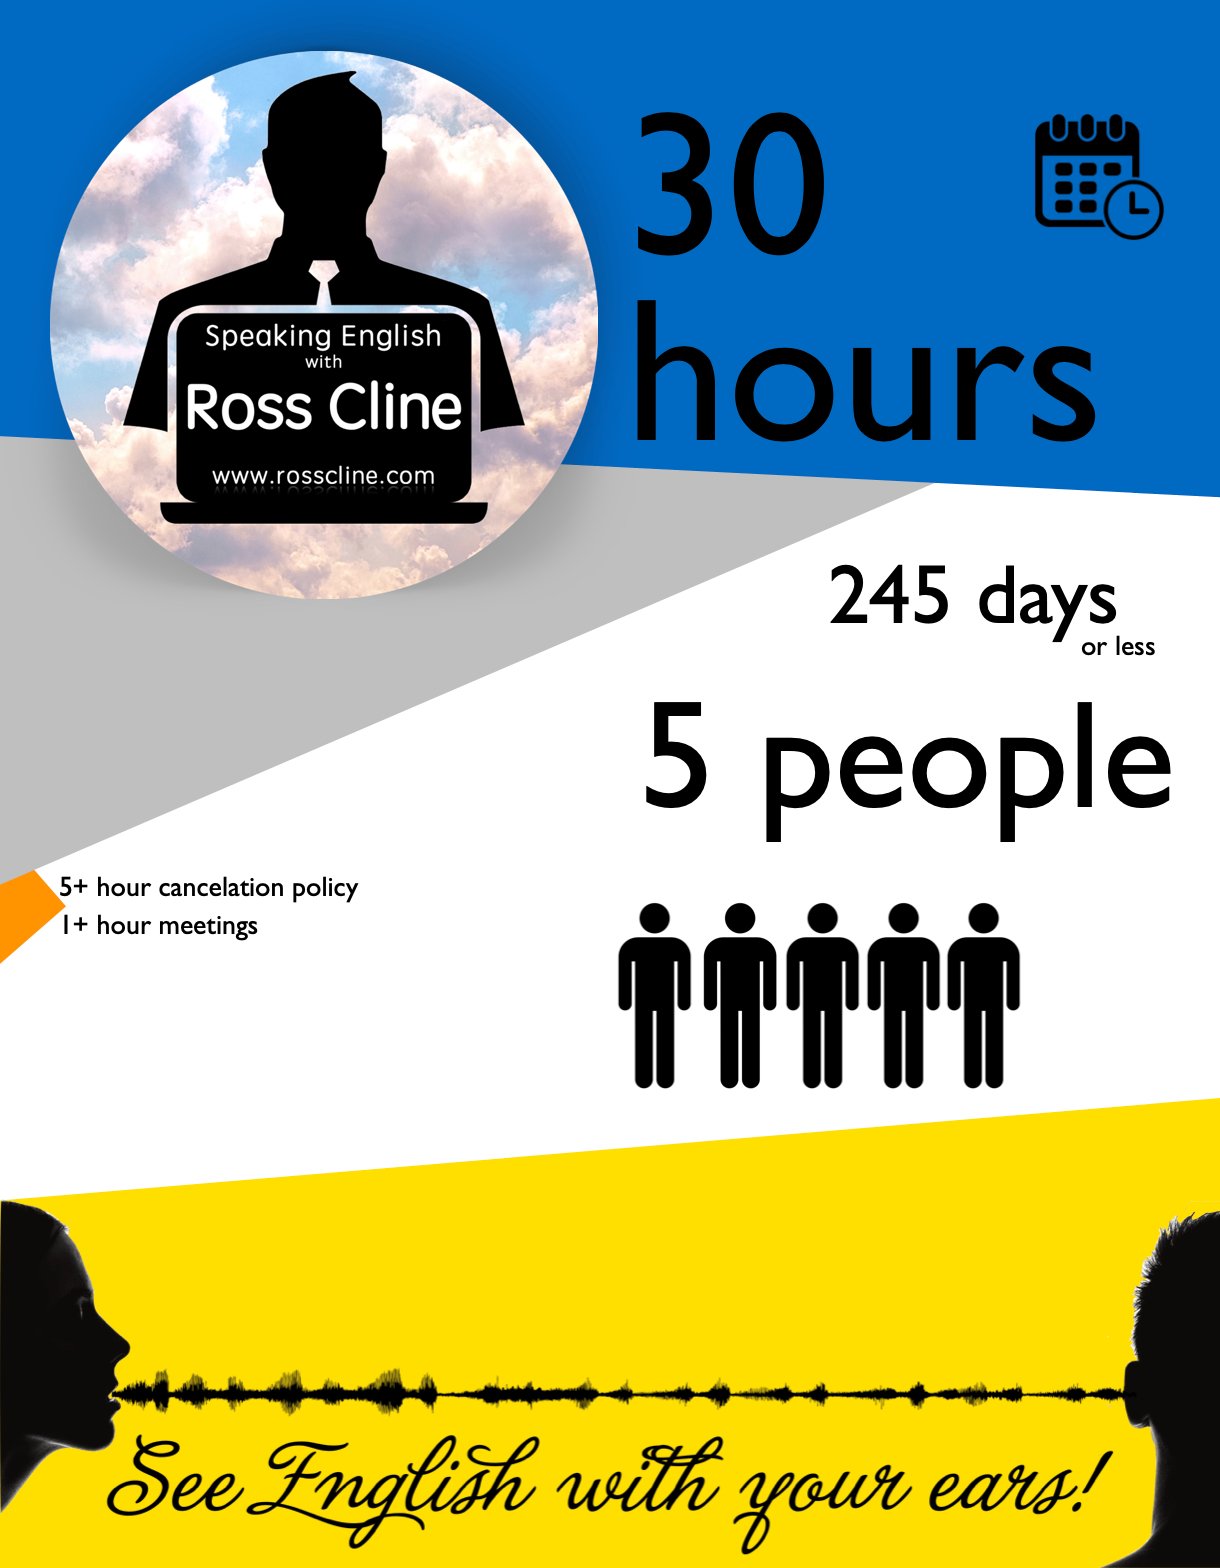 A.) 30 hours of Online Time for 5 people - www.rosscline.com